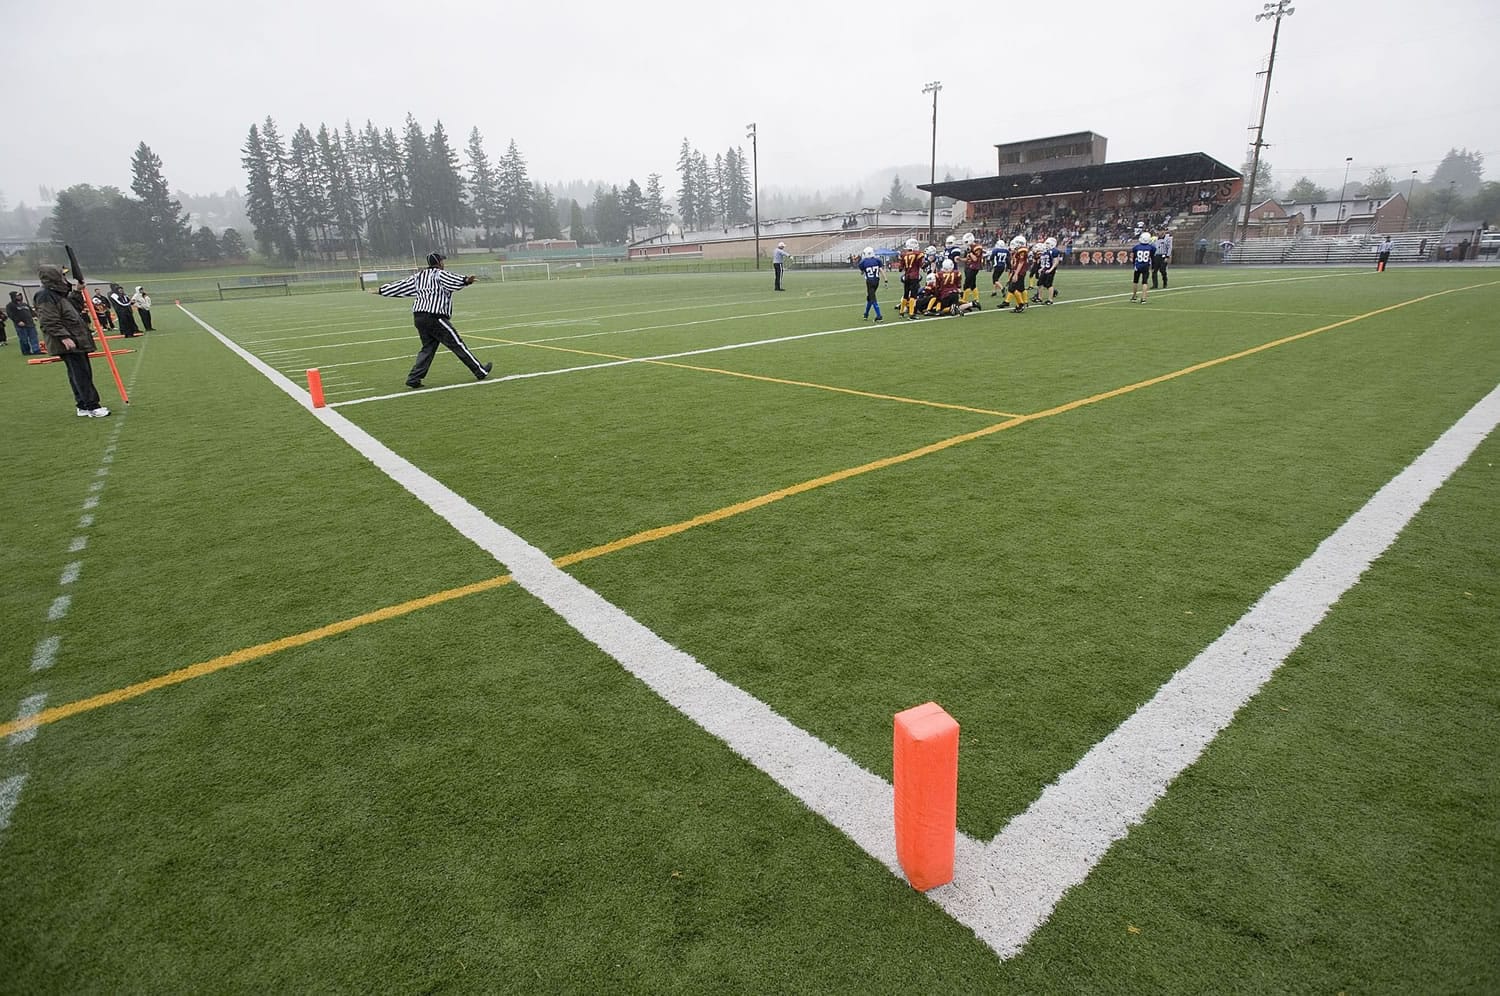 Clark County Youth Football teams, like the one seen here, could play on new turf at Fishback Stadium next year, if Washougal School District officials' goal to replace the existing turf comes to fruition.